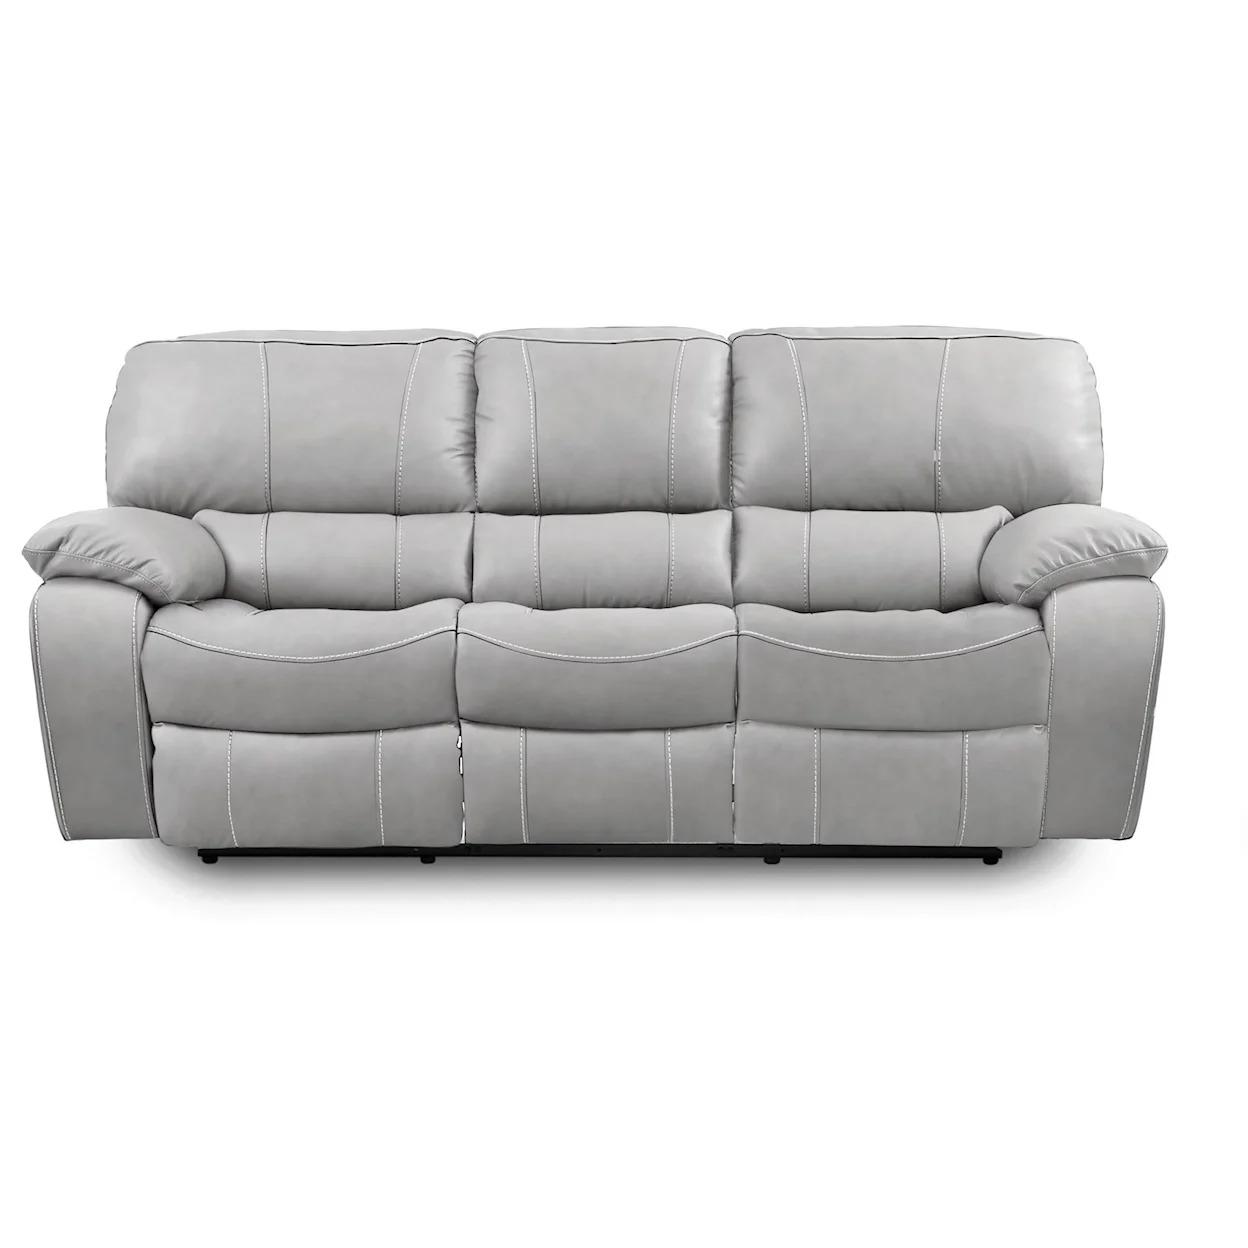 <Diego Manual Dual Reclining Leather / Leather Mate Sofa with Pillow Arms - Gray